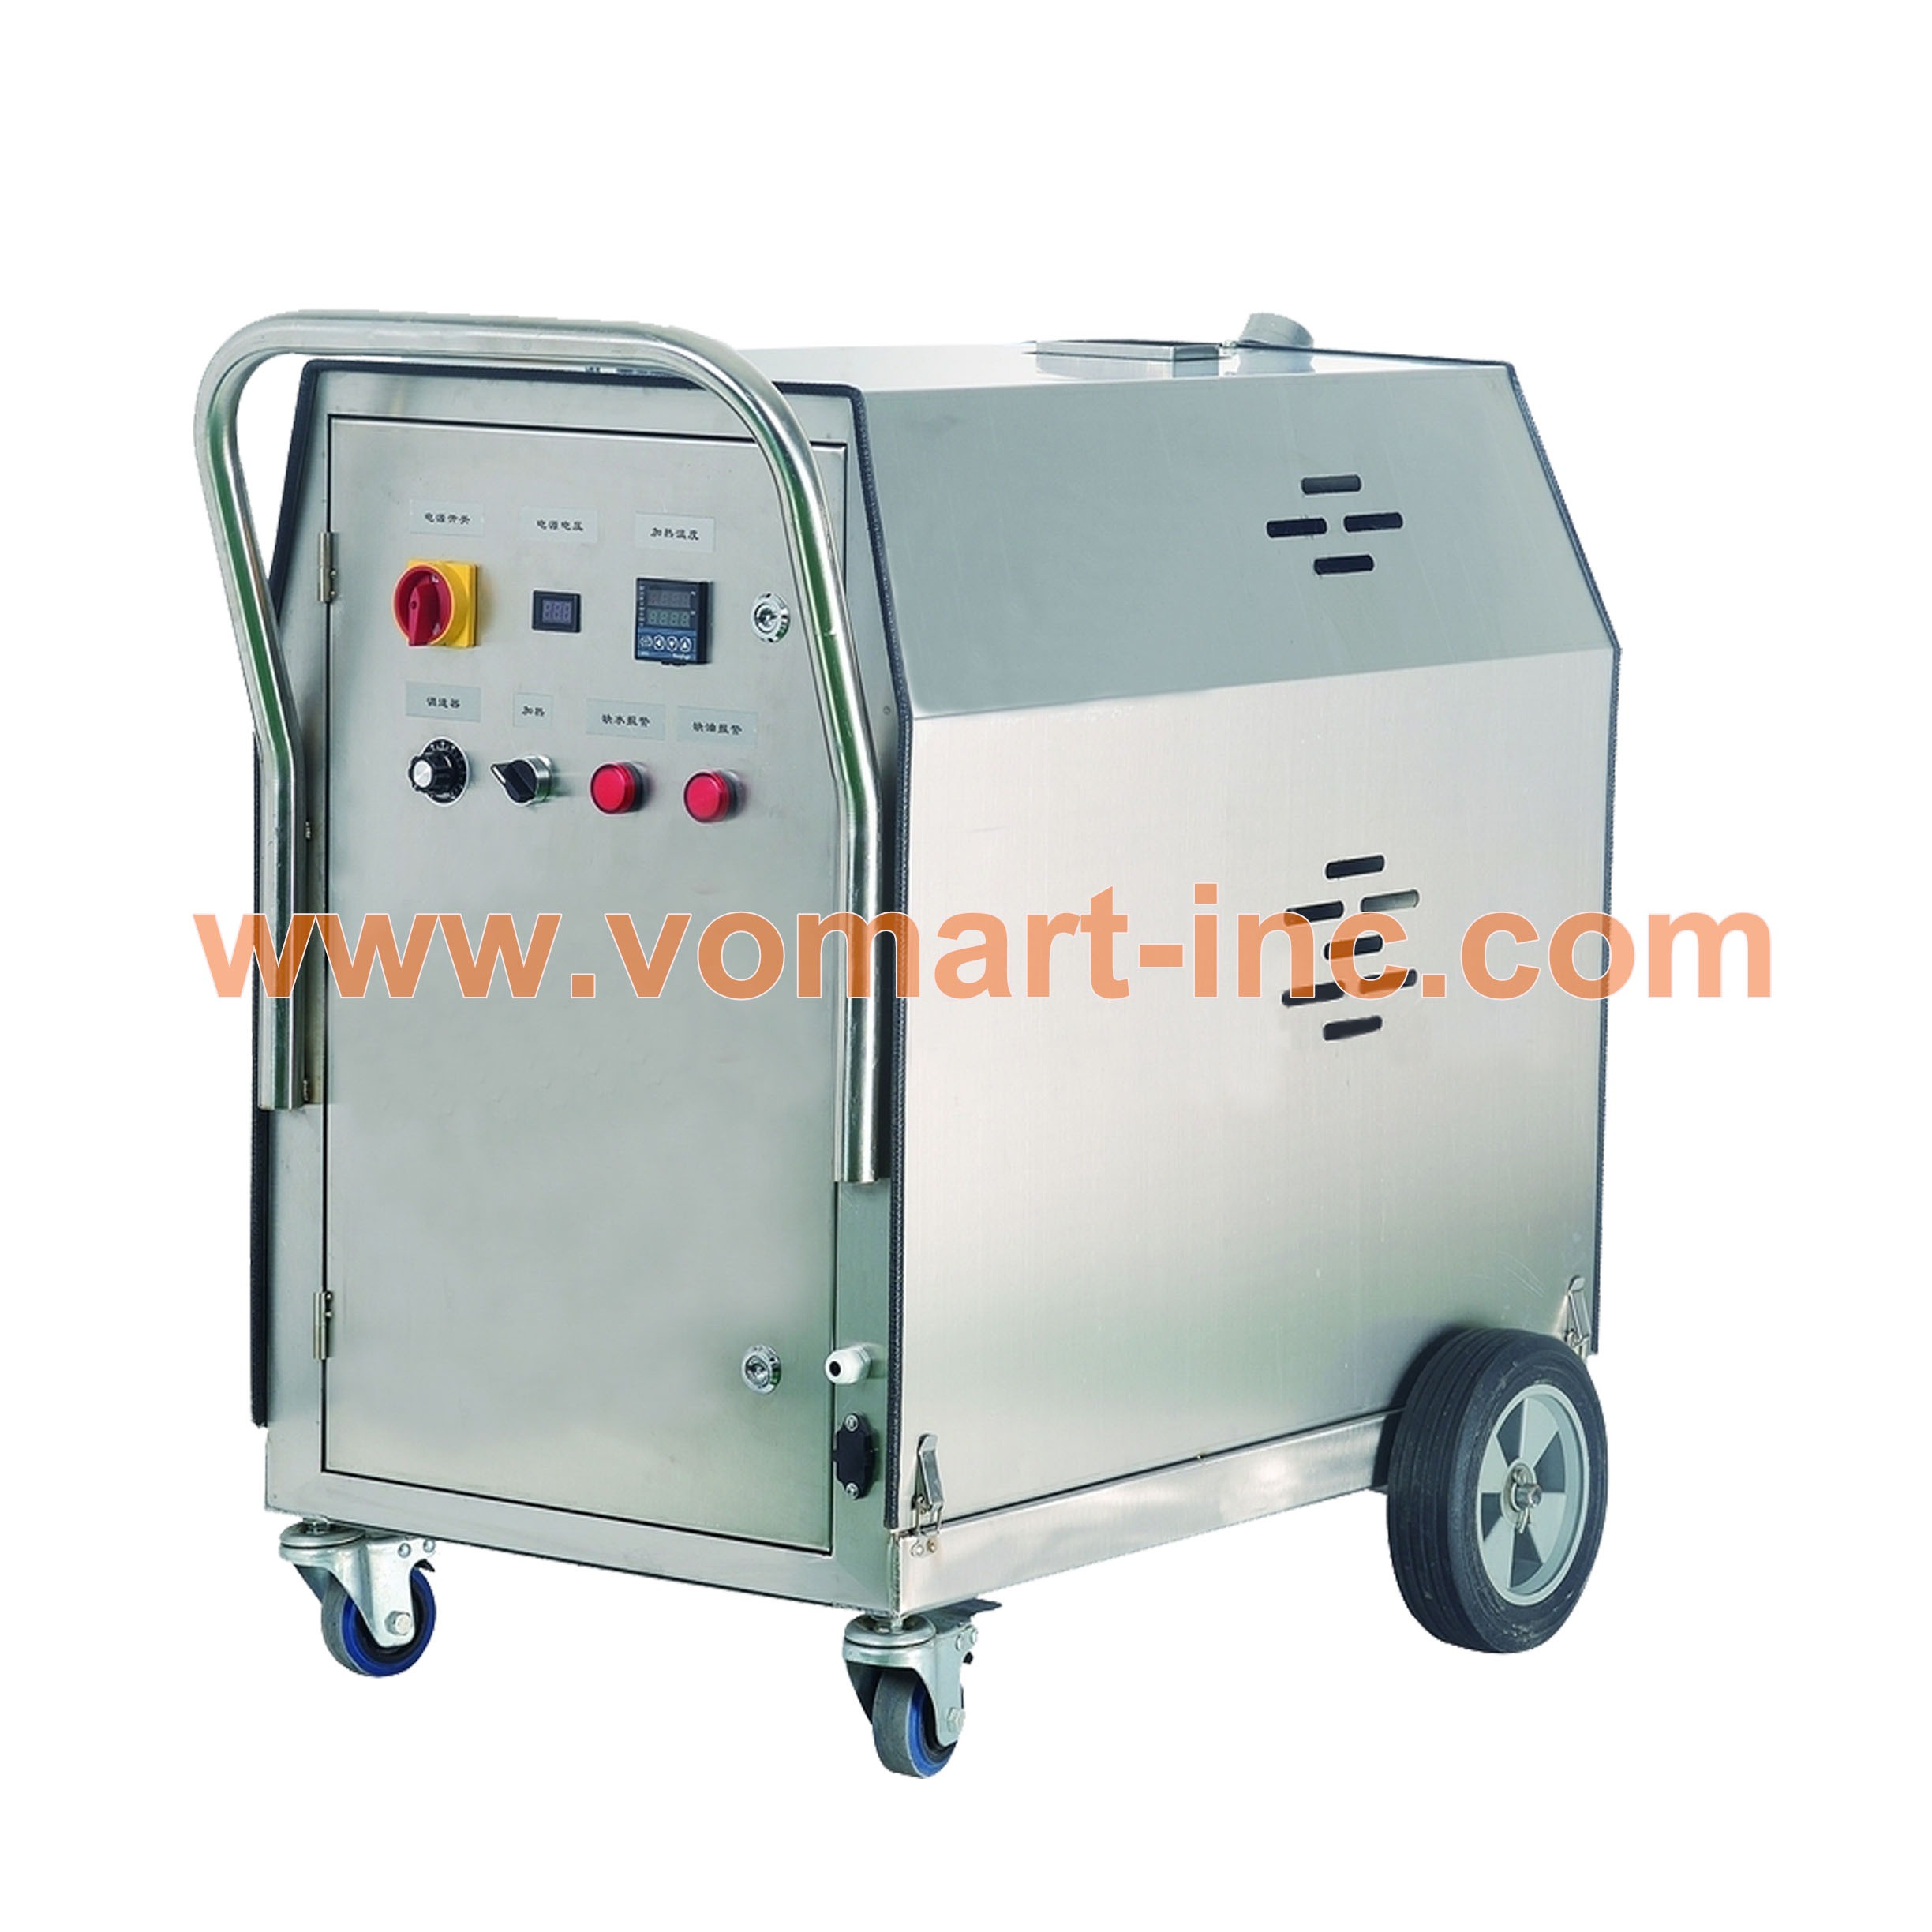 VTD20A Battery Diesel Mobile Steam Car Wash Machine - Vomart-Mobile steam car  wash machine , hot/cold water high pressure wash machine ,automatic car  wash machine,car lift and other equipment.